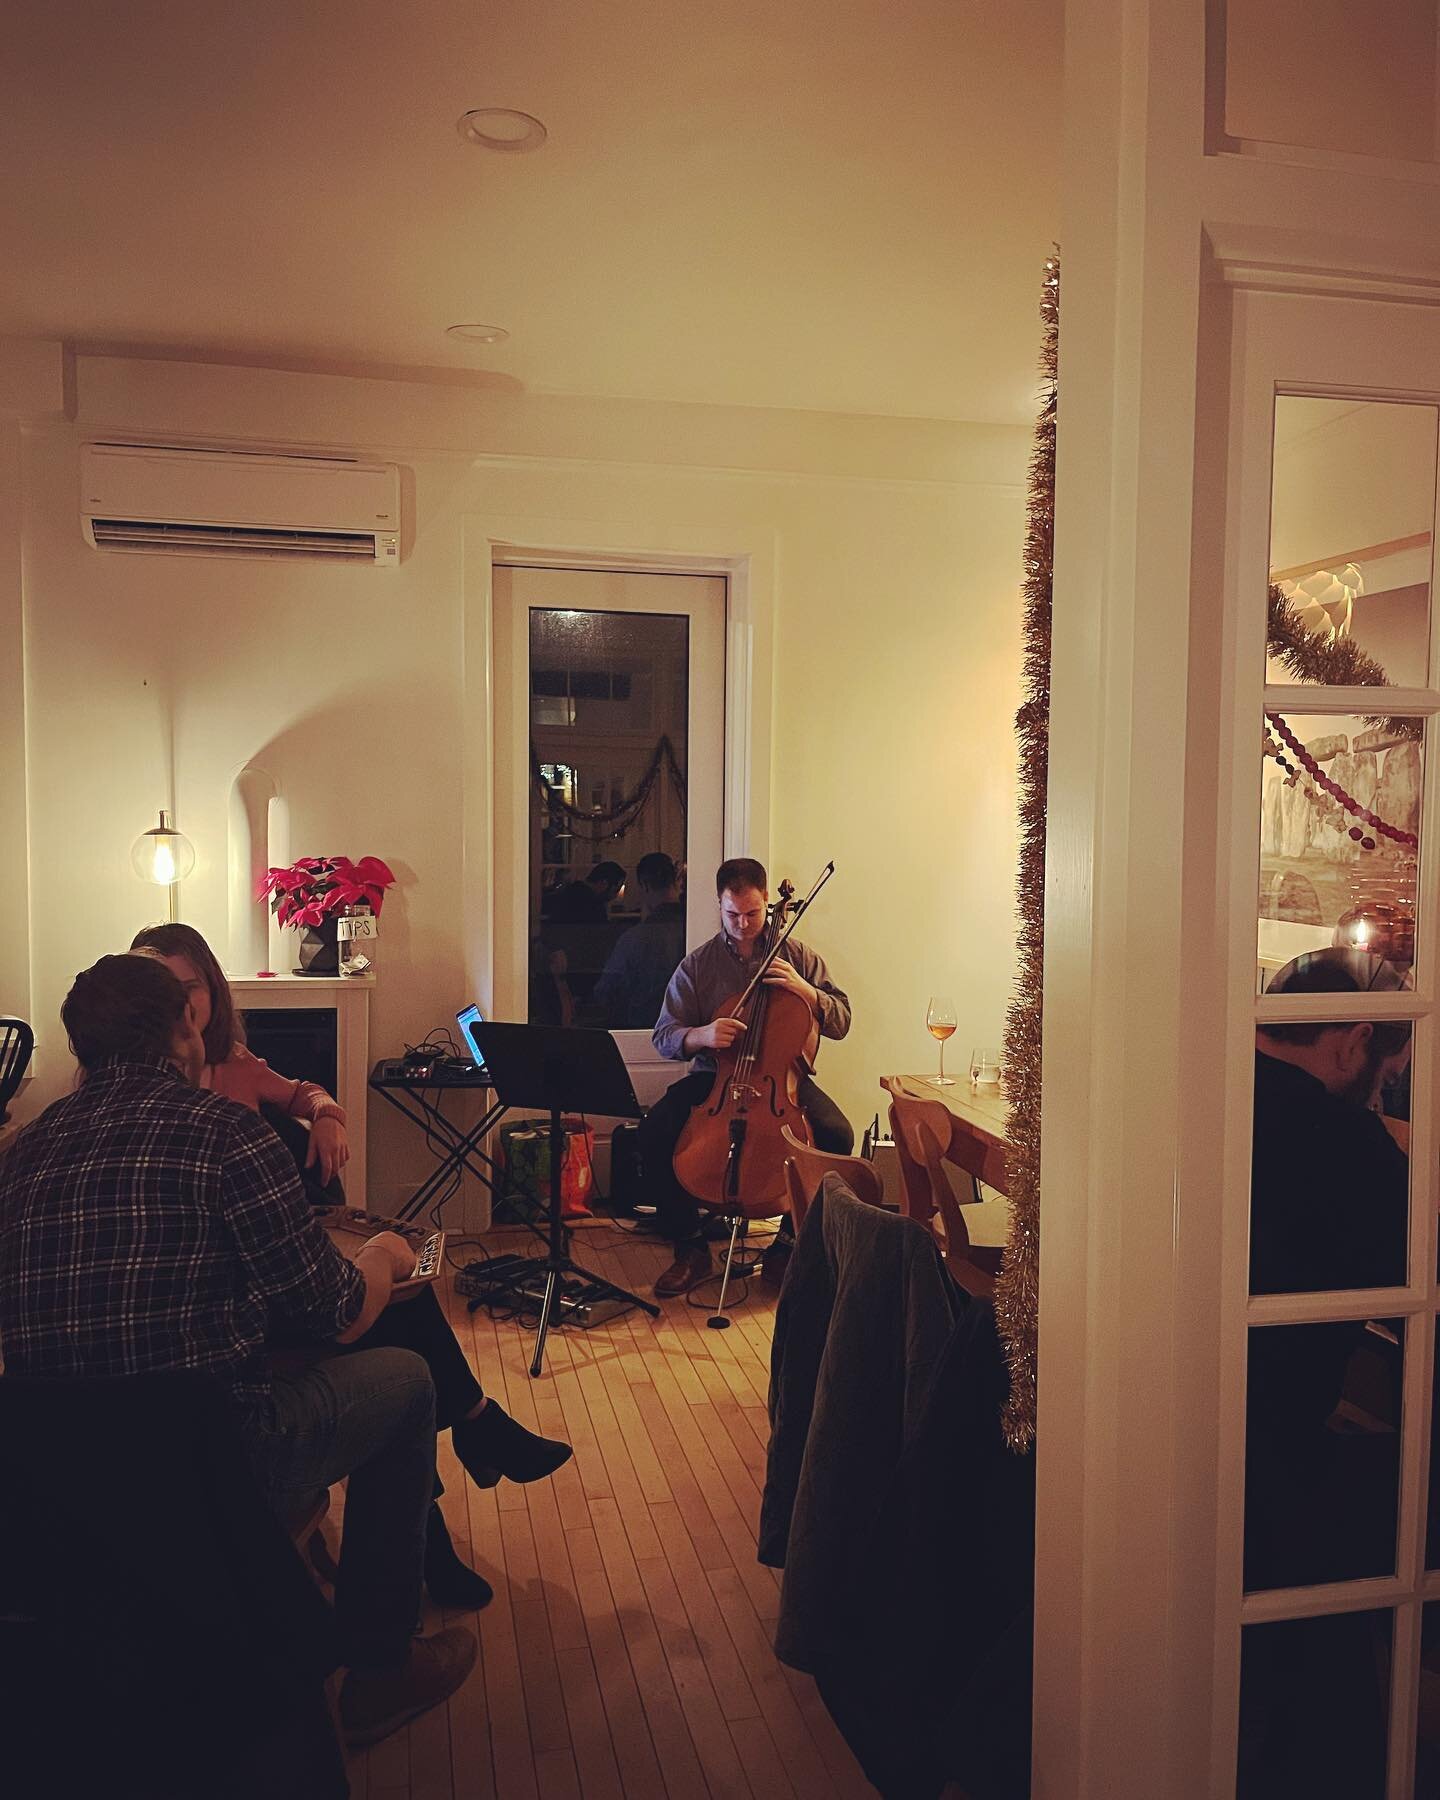 Back by popular demand! This Saturday, from 6:00 to 8:00, I&rsquo;ll be playing some music again @seafolkcoffee !
I&rsquo;ll be playing a mixture of classical (mostly Bach) and my own composition.
Come cozy up and enjoy some wine, tea, and snacks!
📸